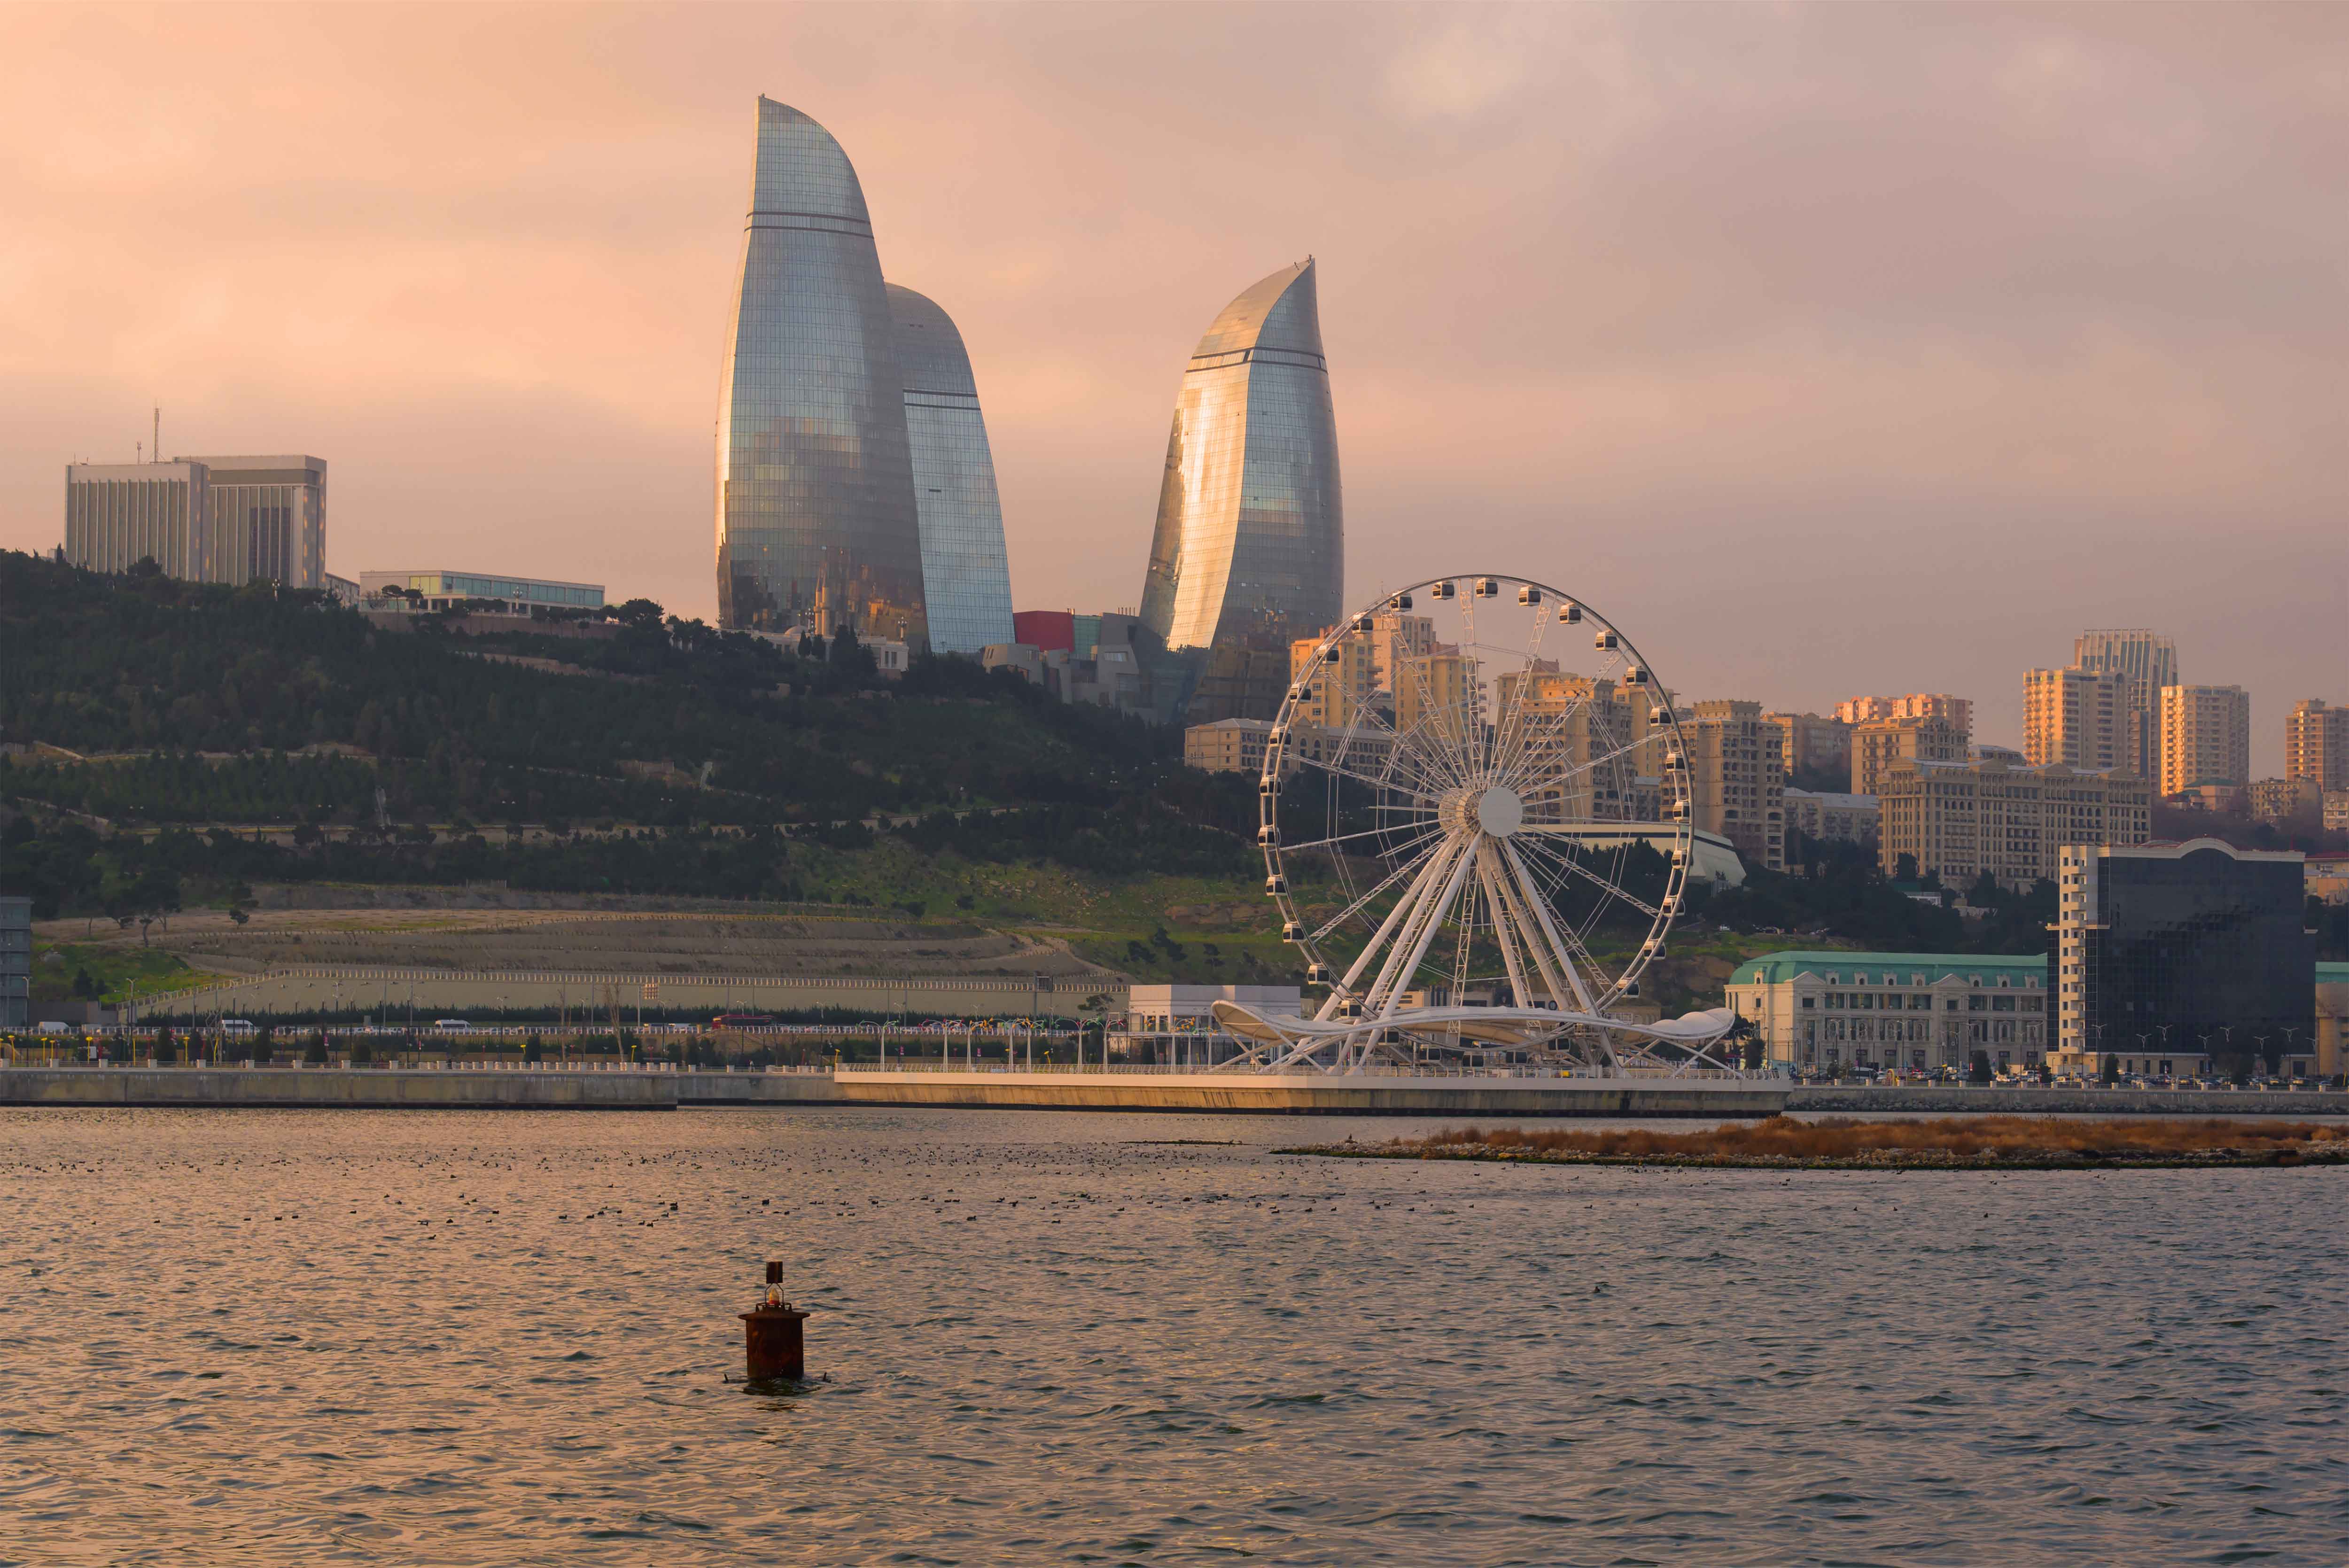 The waterfront in Baku, Azerbaijan, with the Flame Towers in the background